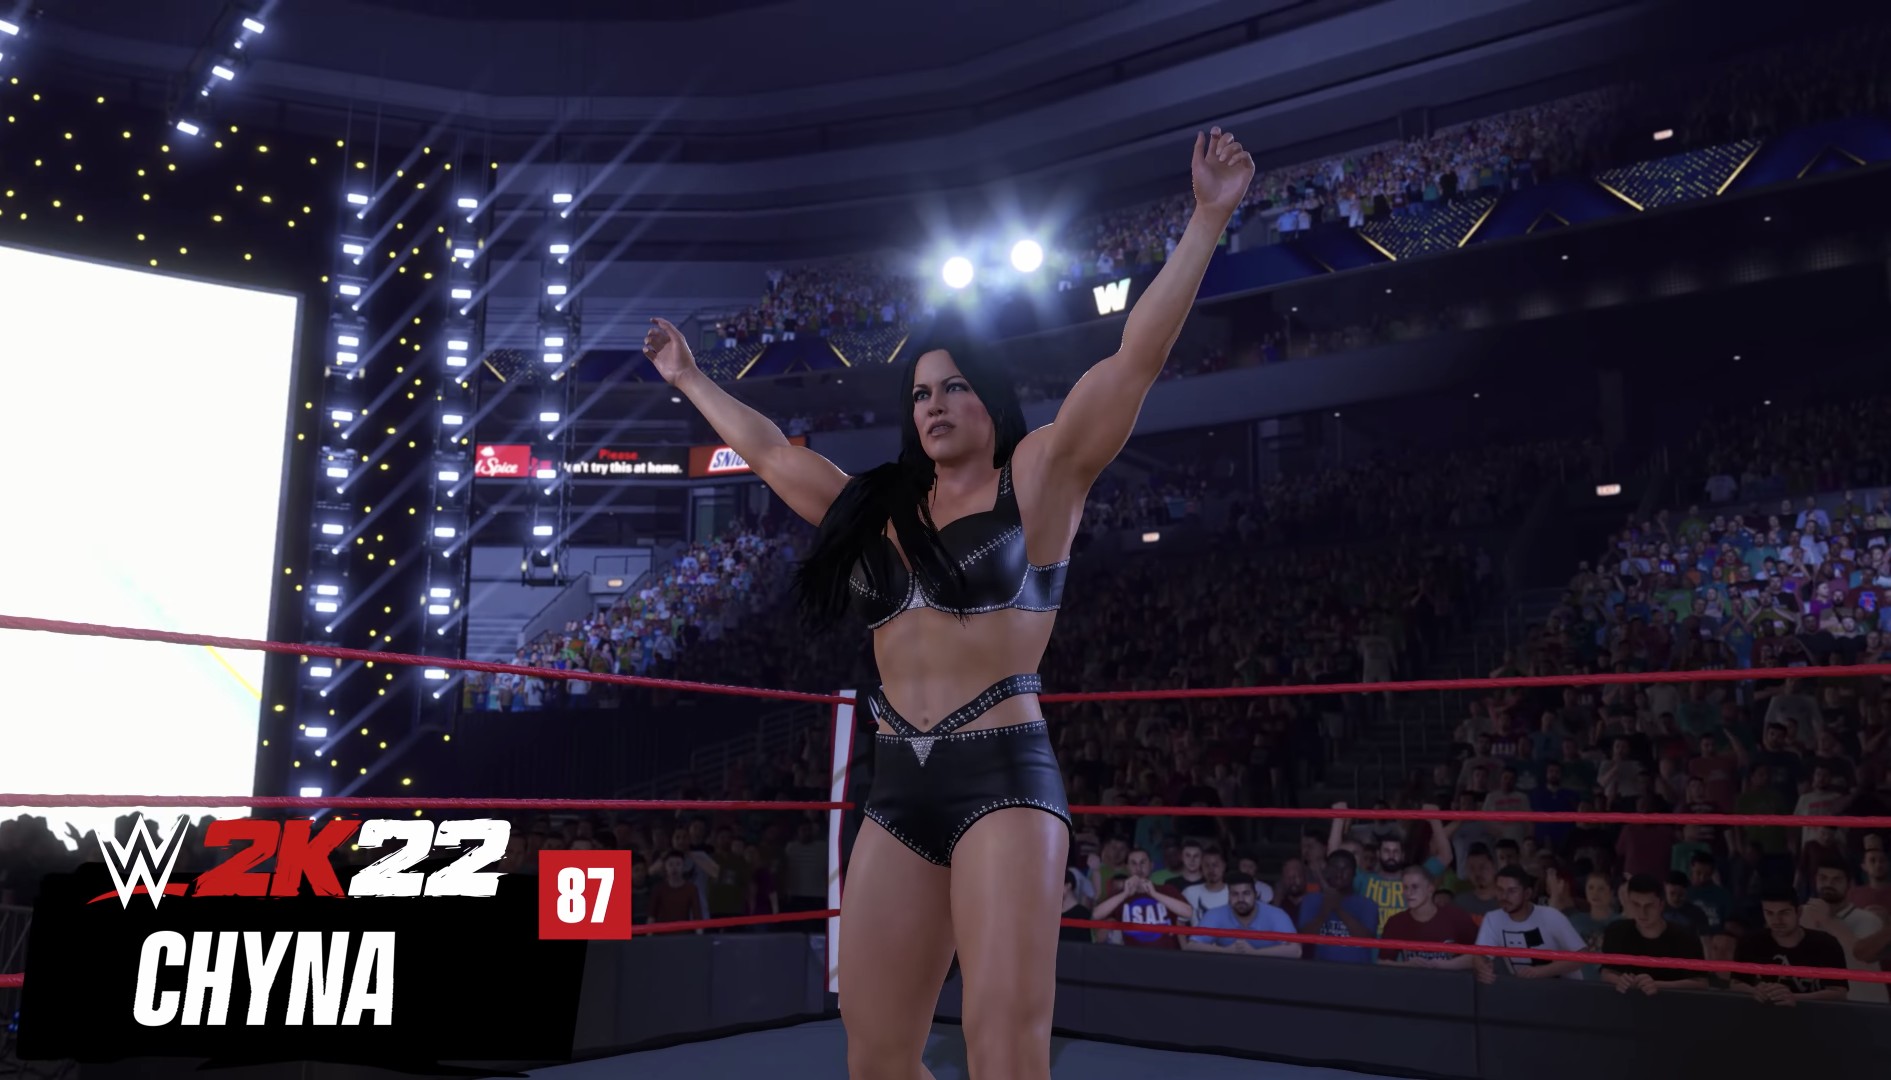 WWE 2K22 Legends Roster And Rating Reveal: Chyna, Big Boss Man